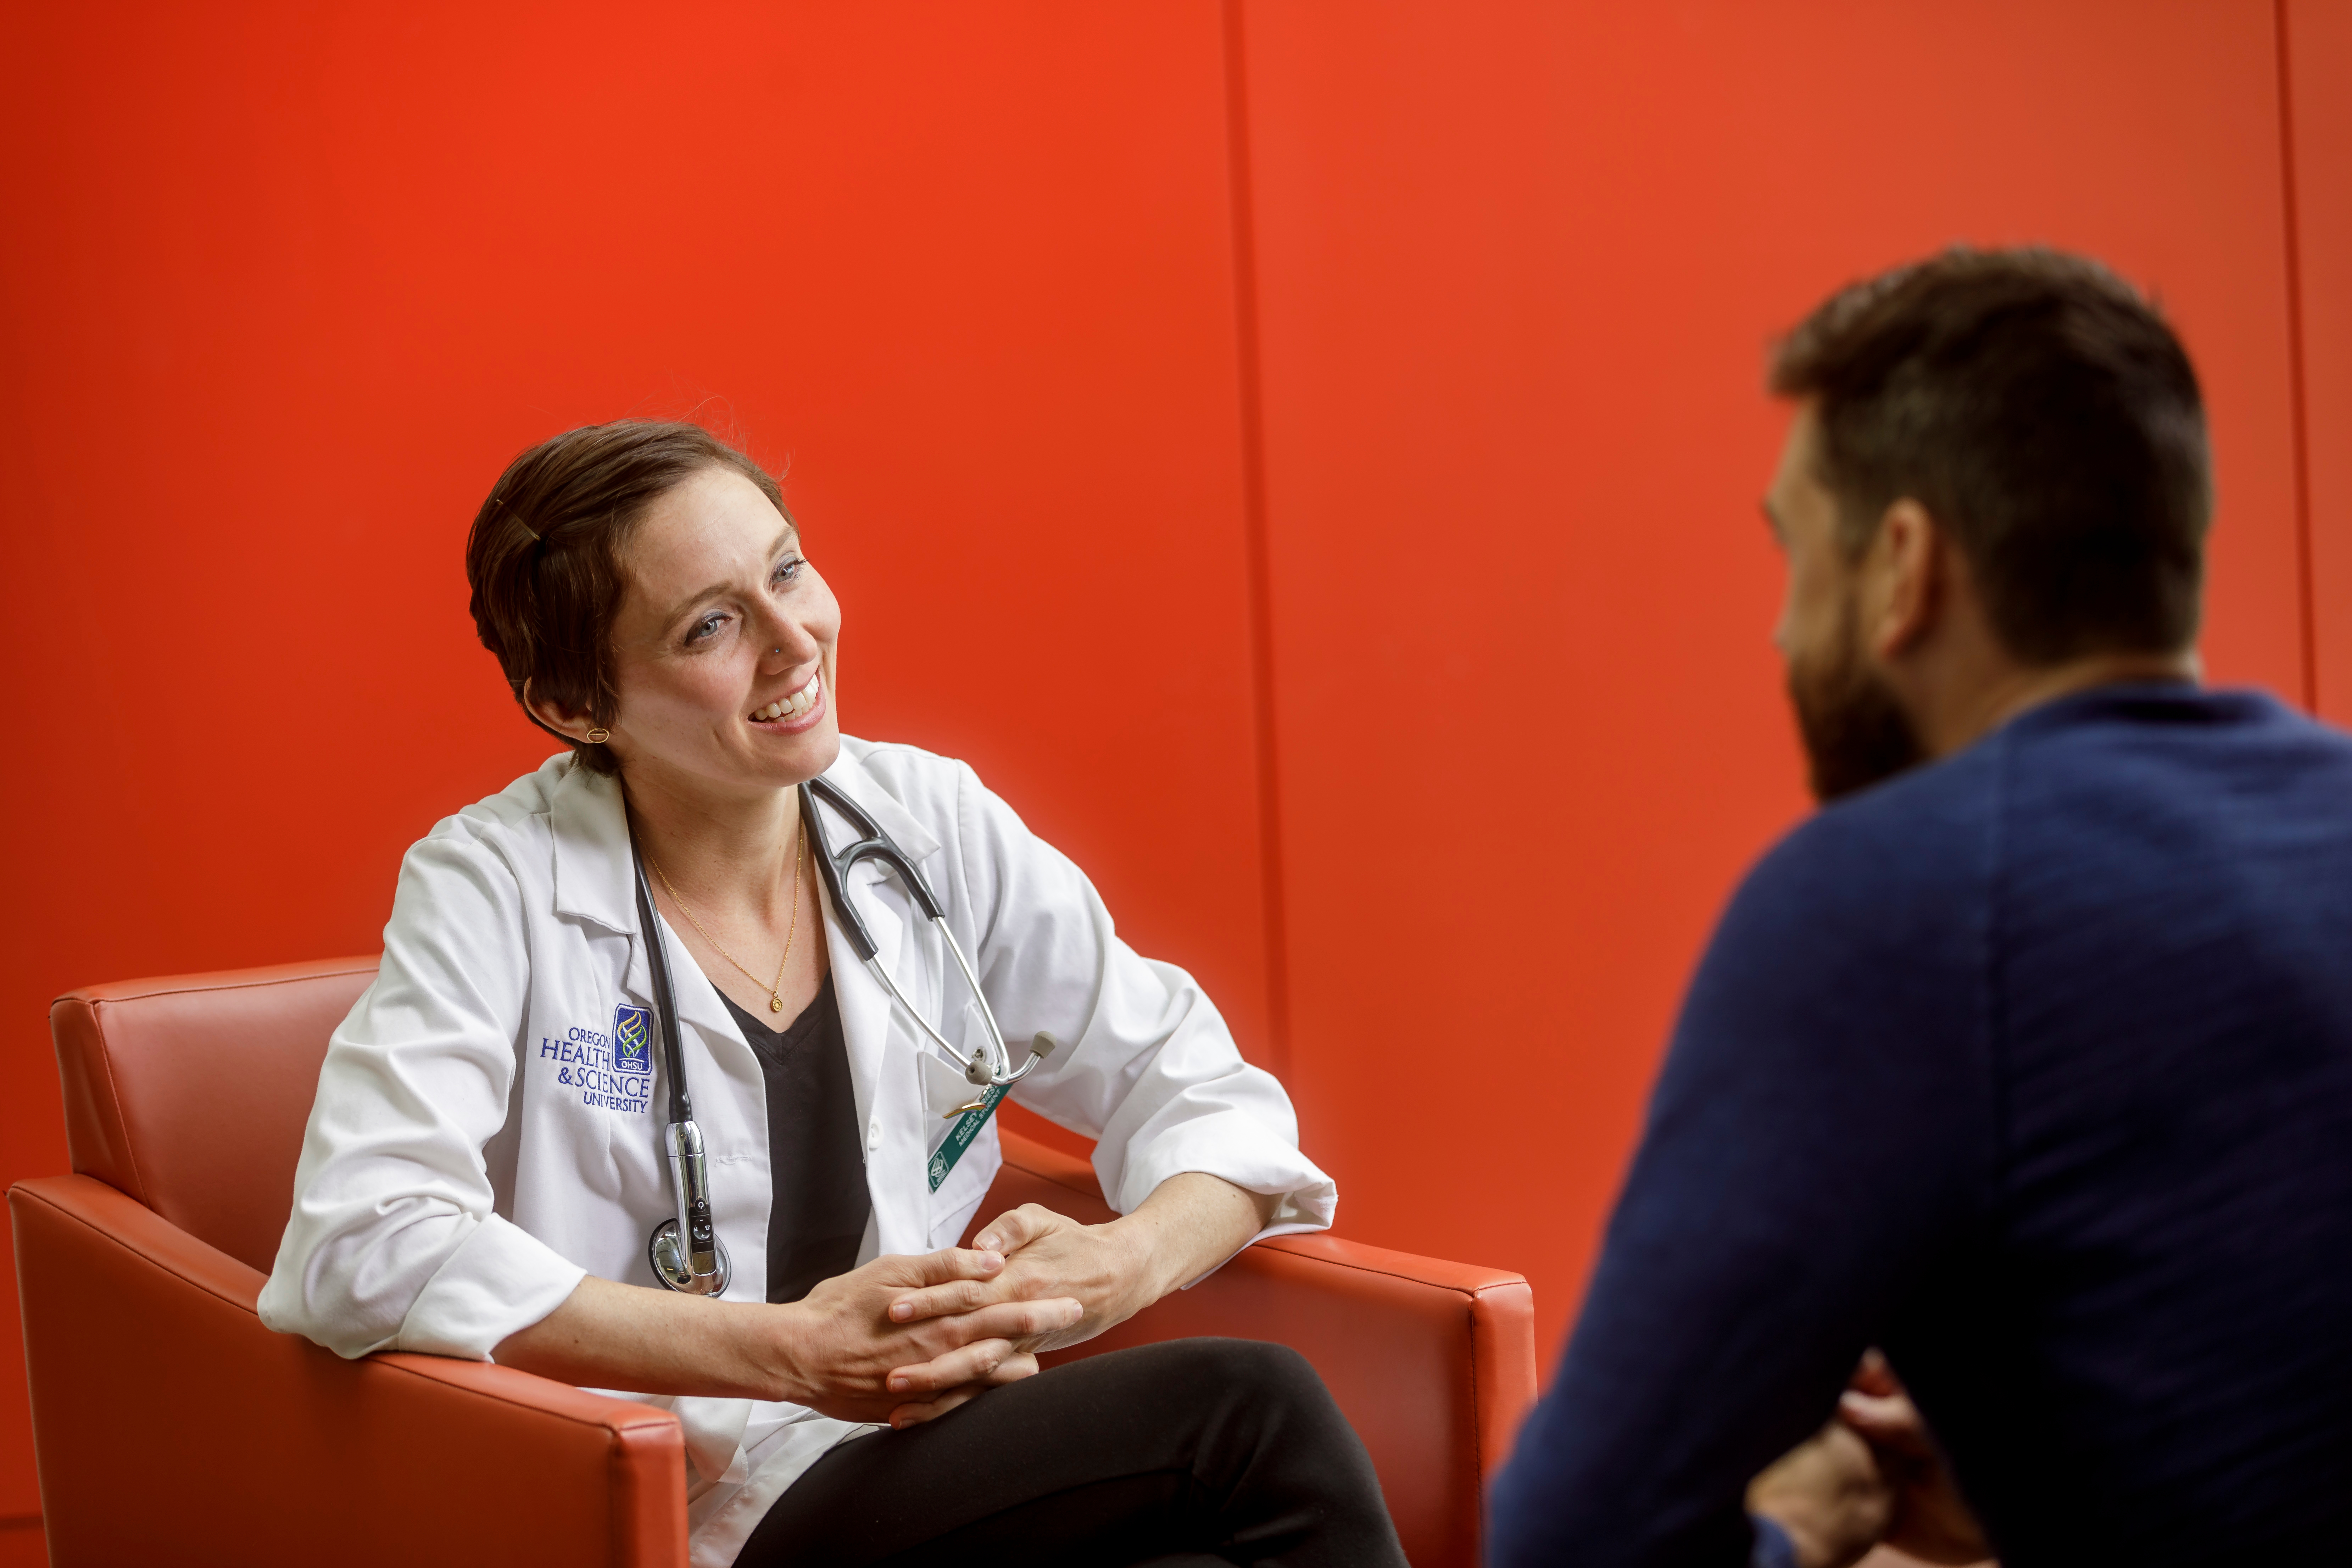 a clinician in a lap coat and stethoscope talking to a patient